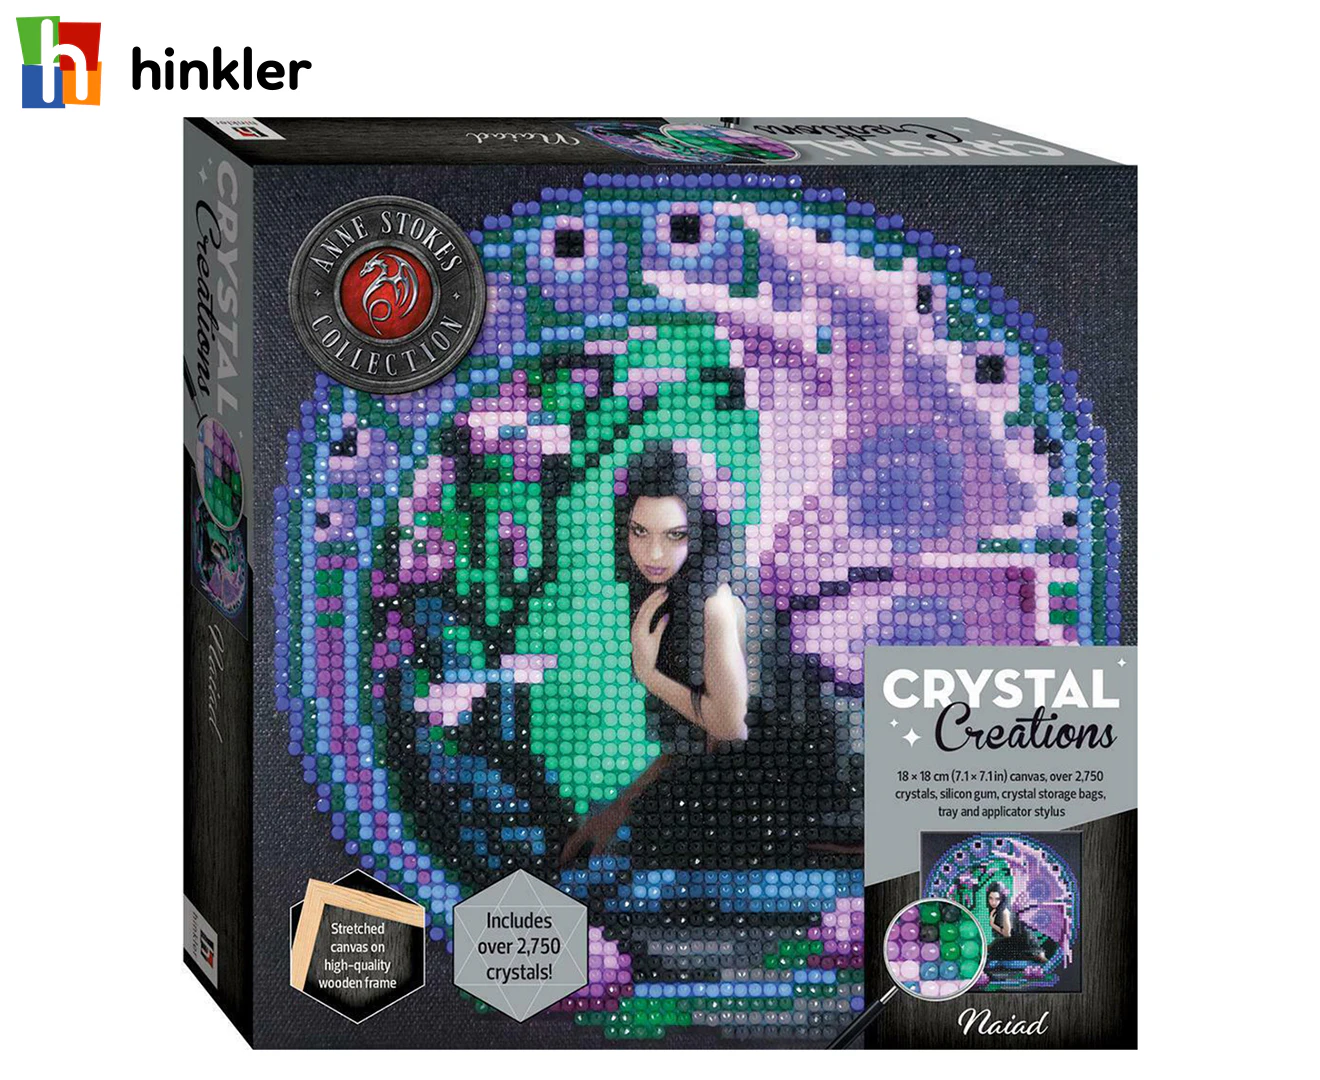 Curious Craft Ultimate Crystal Creations Accessory Kit by Hinkler